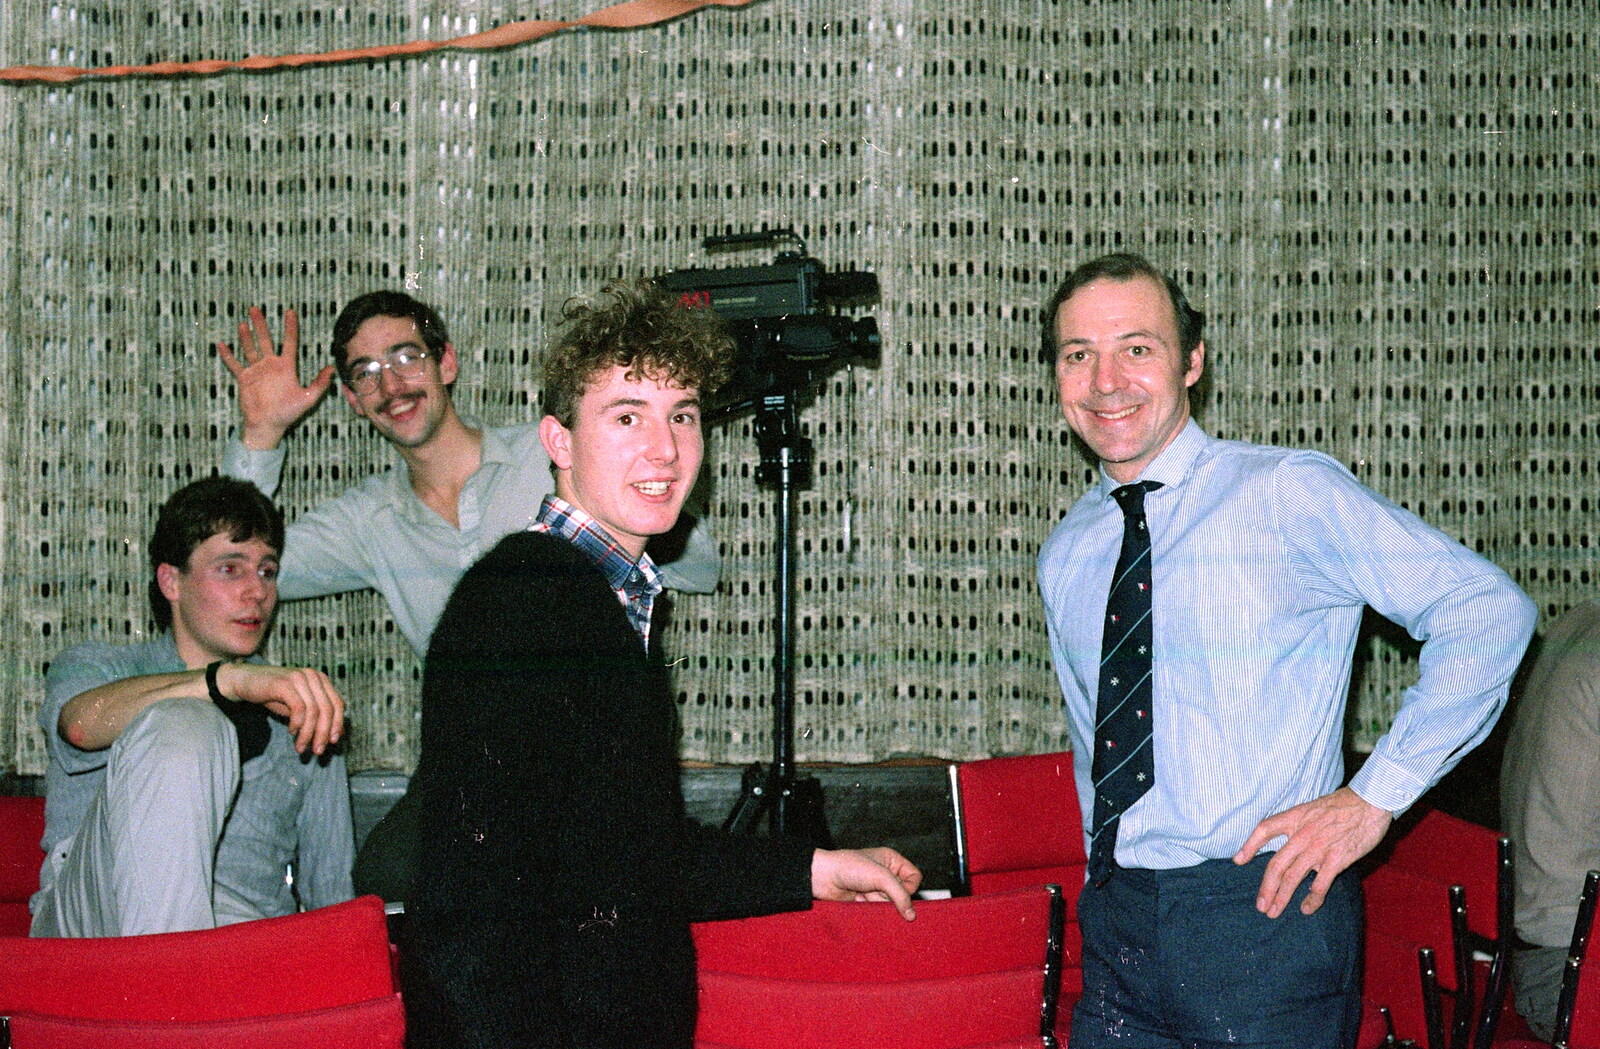 The dudes from Students' Union TV (SUTV) from Uni: The Fly Christmas Party and BABS Panto, Plymouth Polytechnic, Devon - December 11th 1985